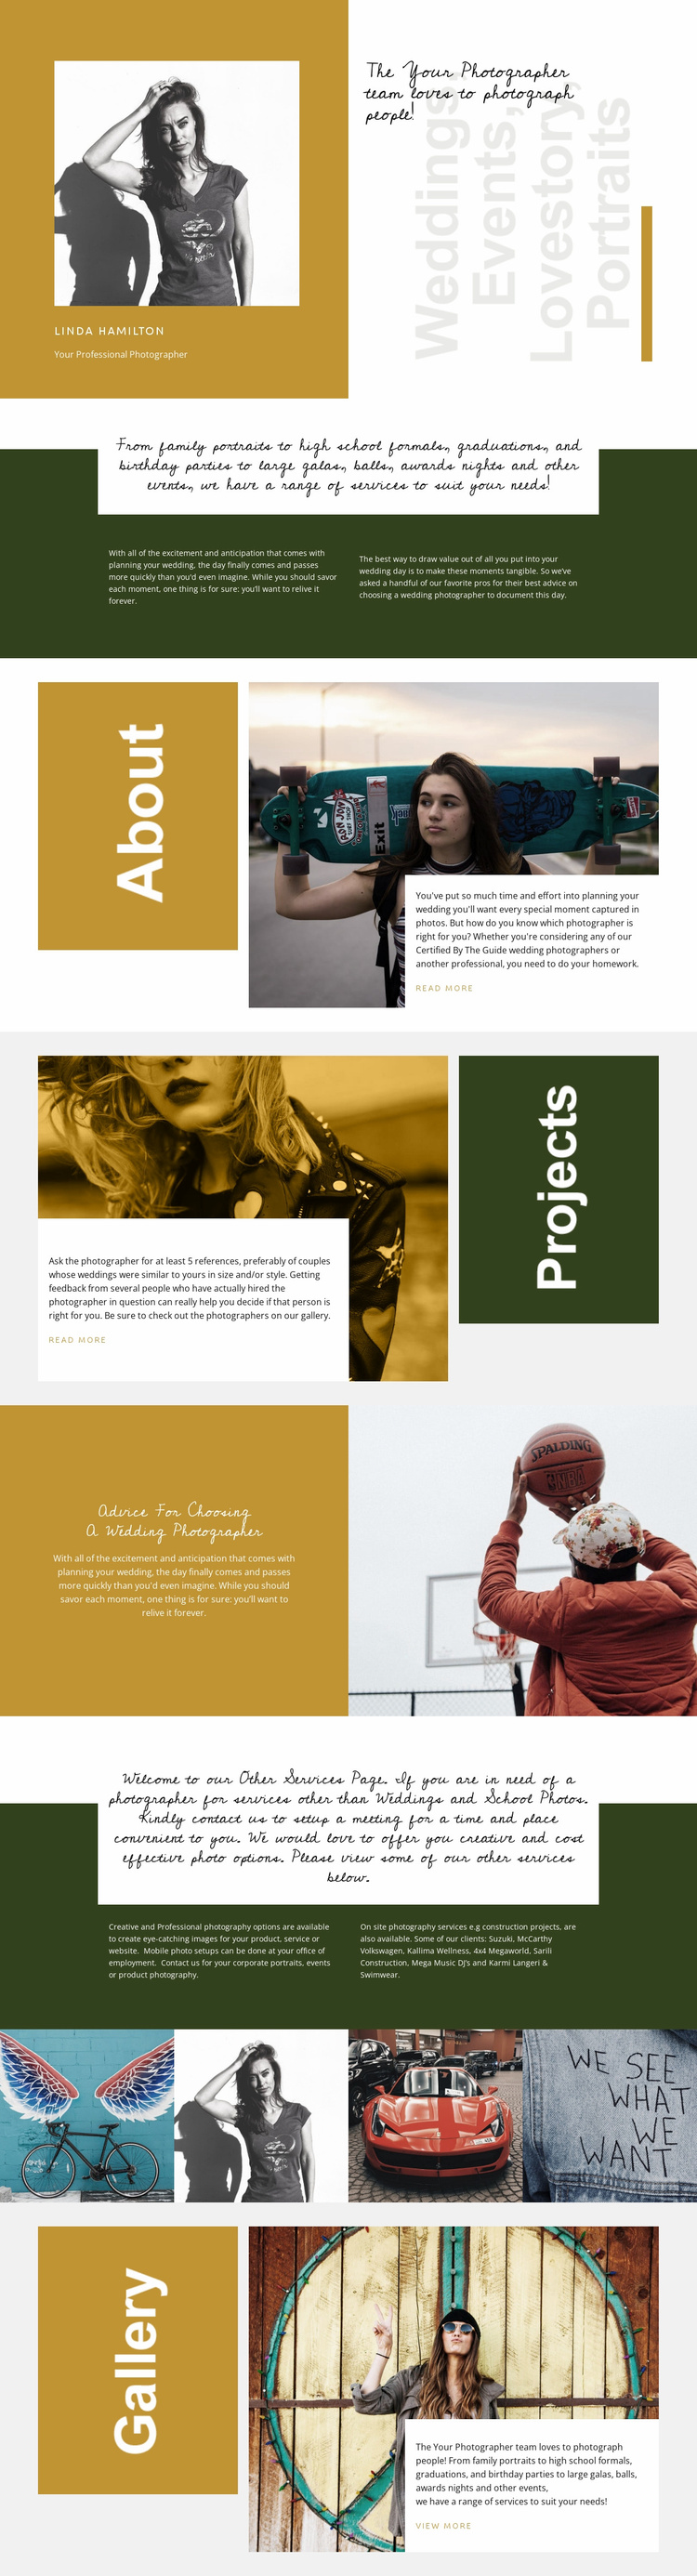 Fashion photography courses Website Template